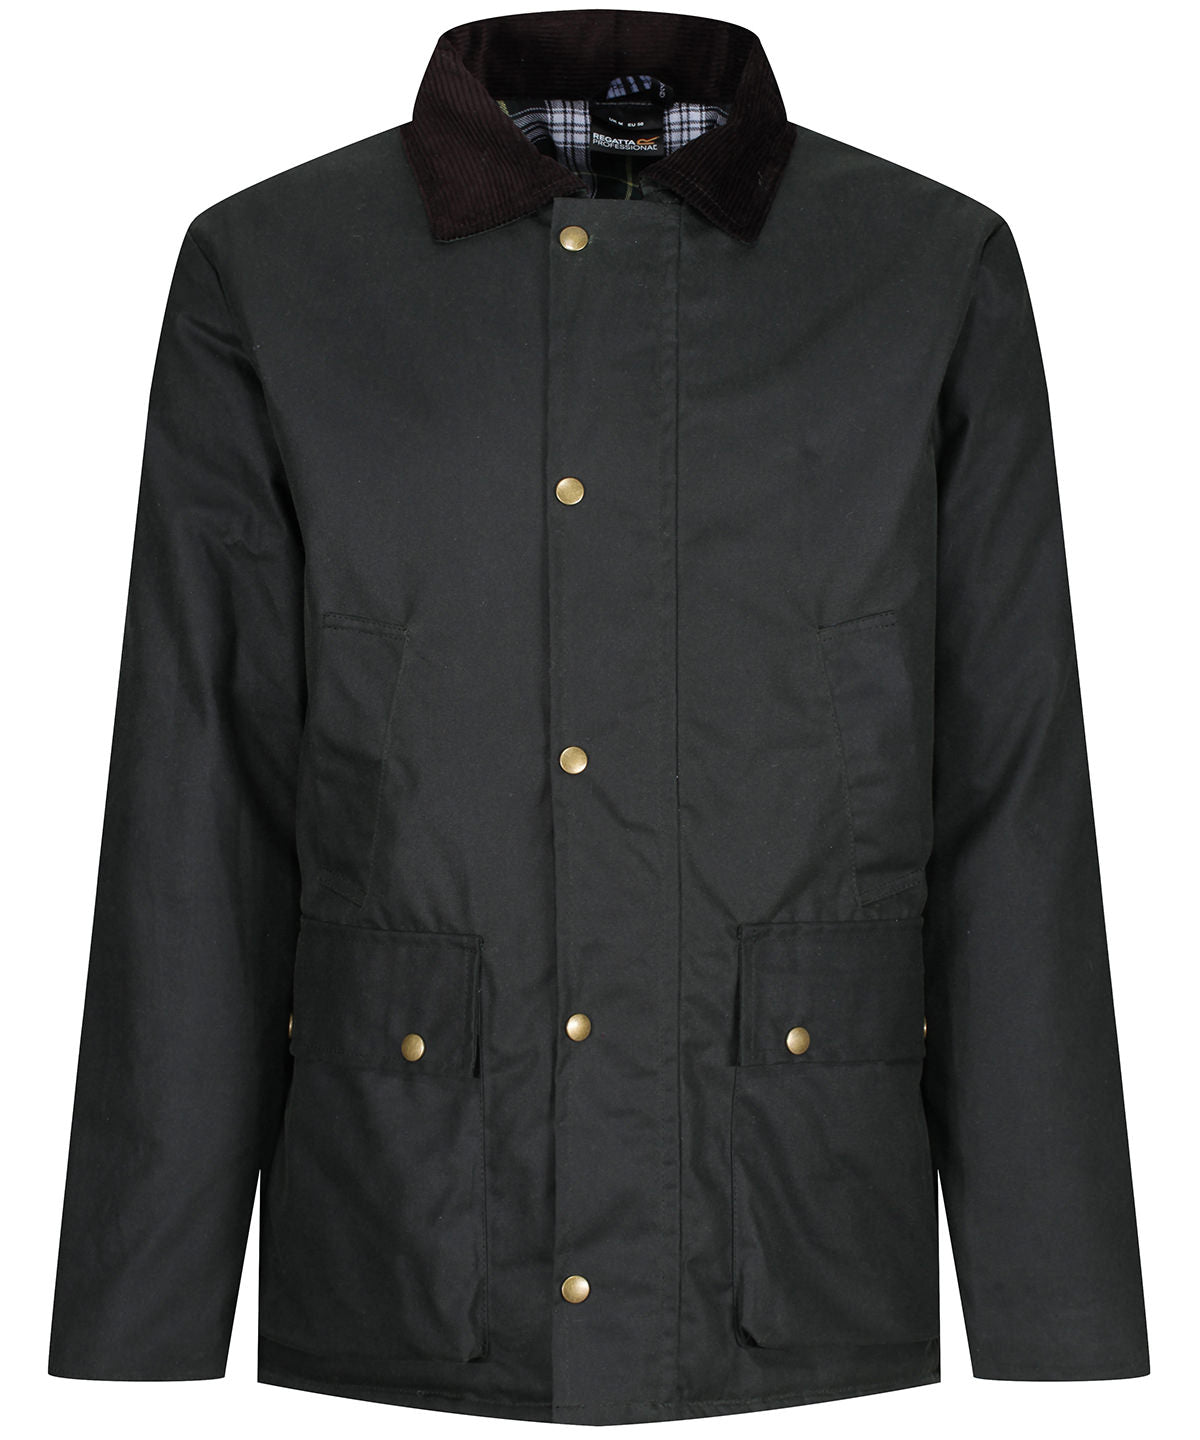 Pensford insulated waxed jacket